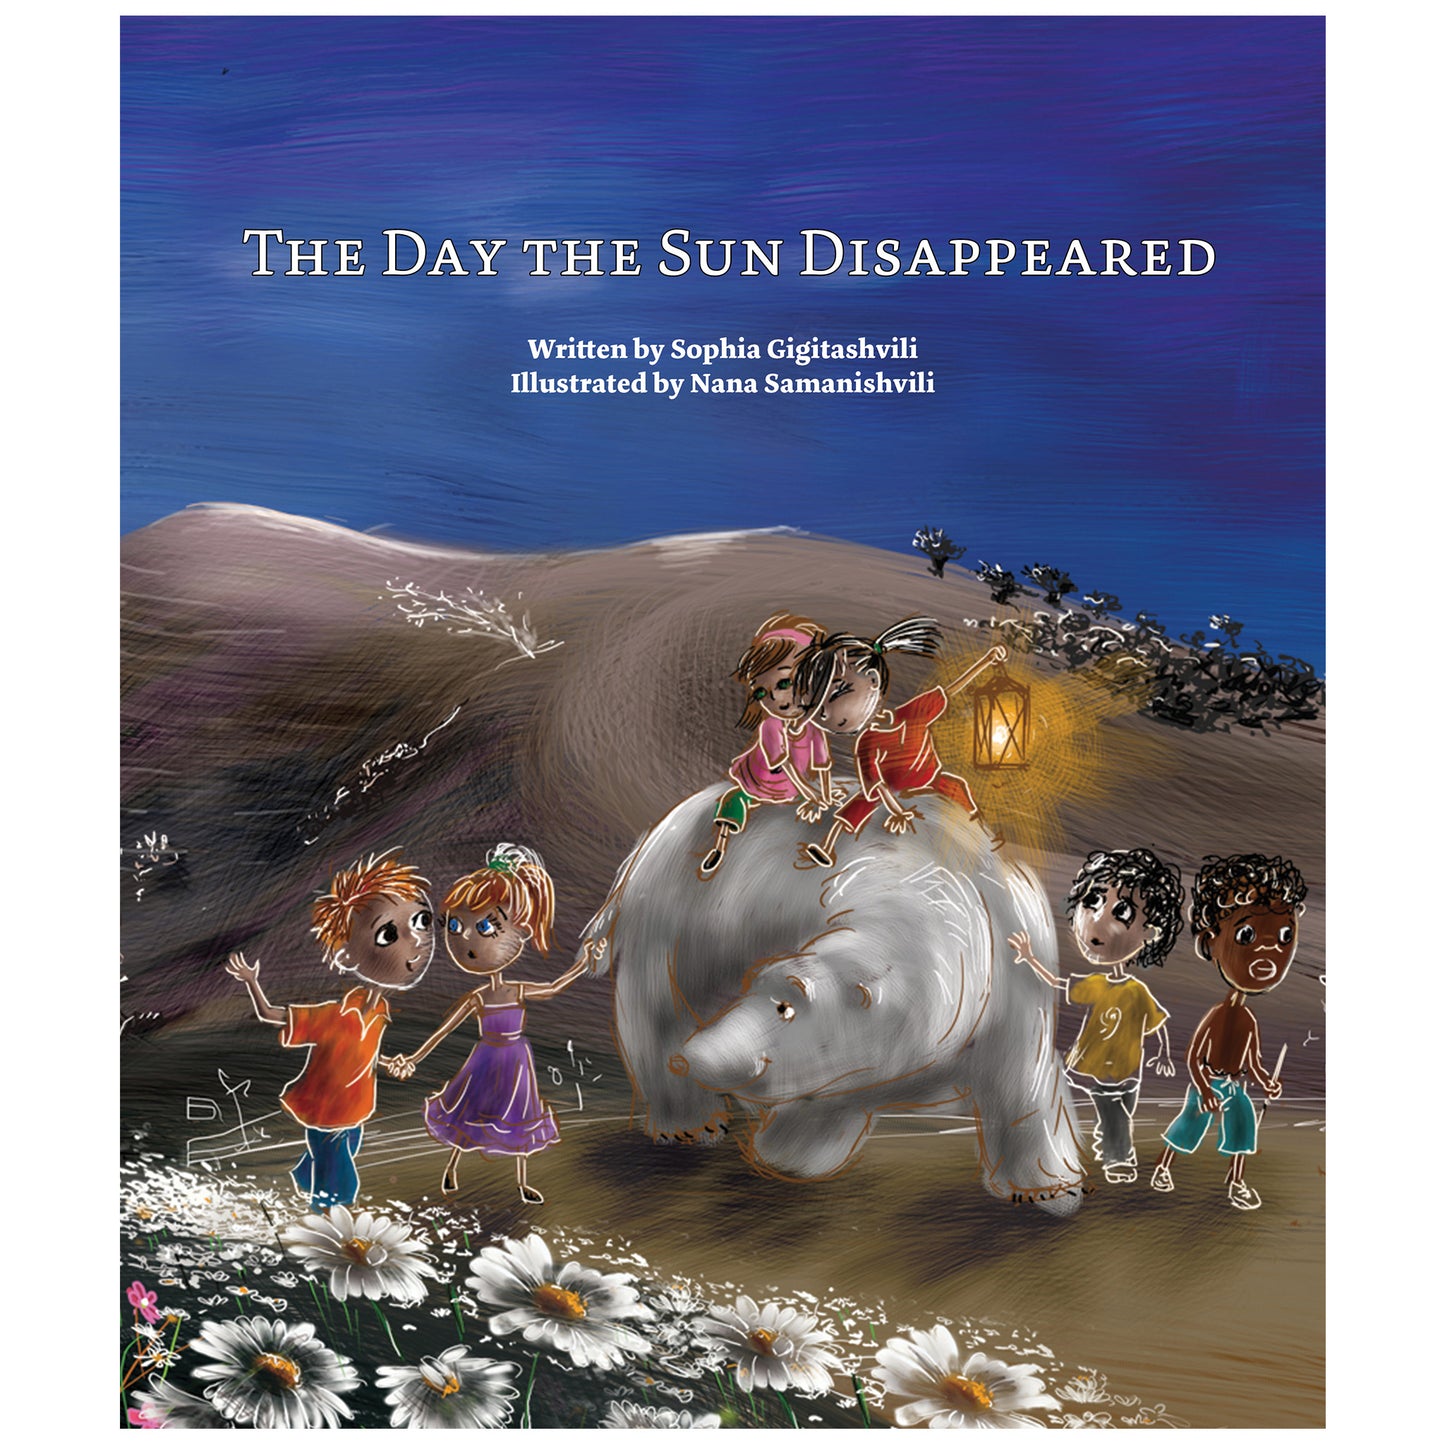 The Day the Sun Disappeared